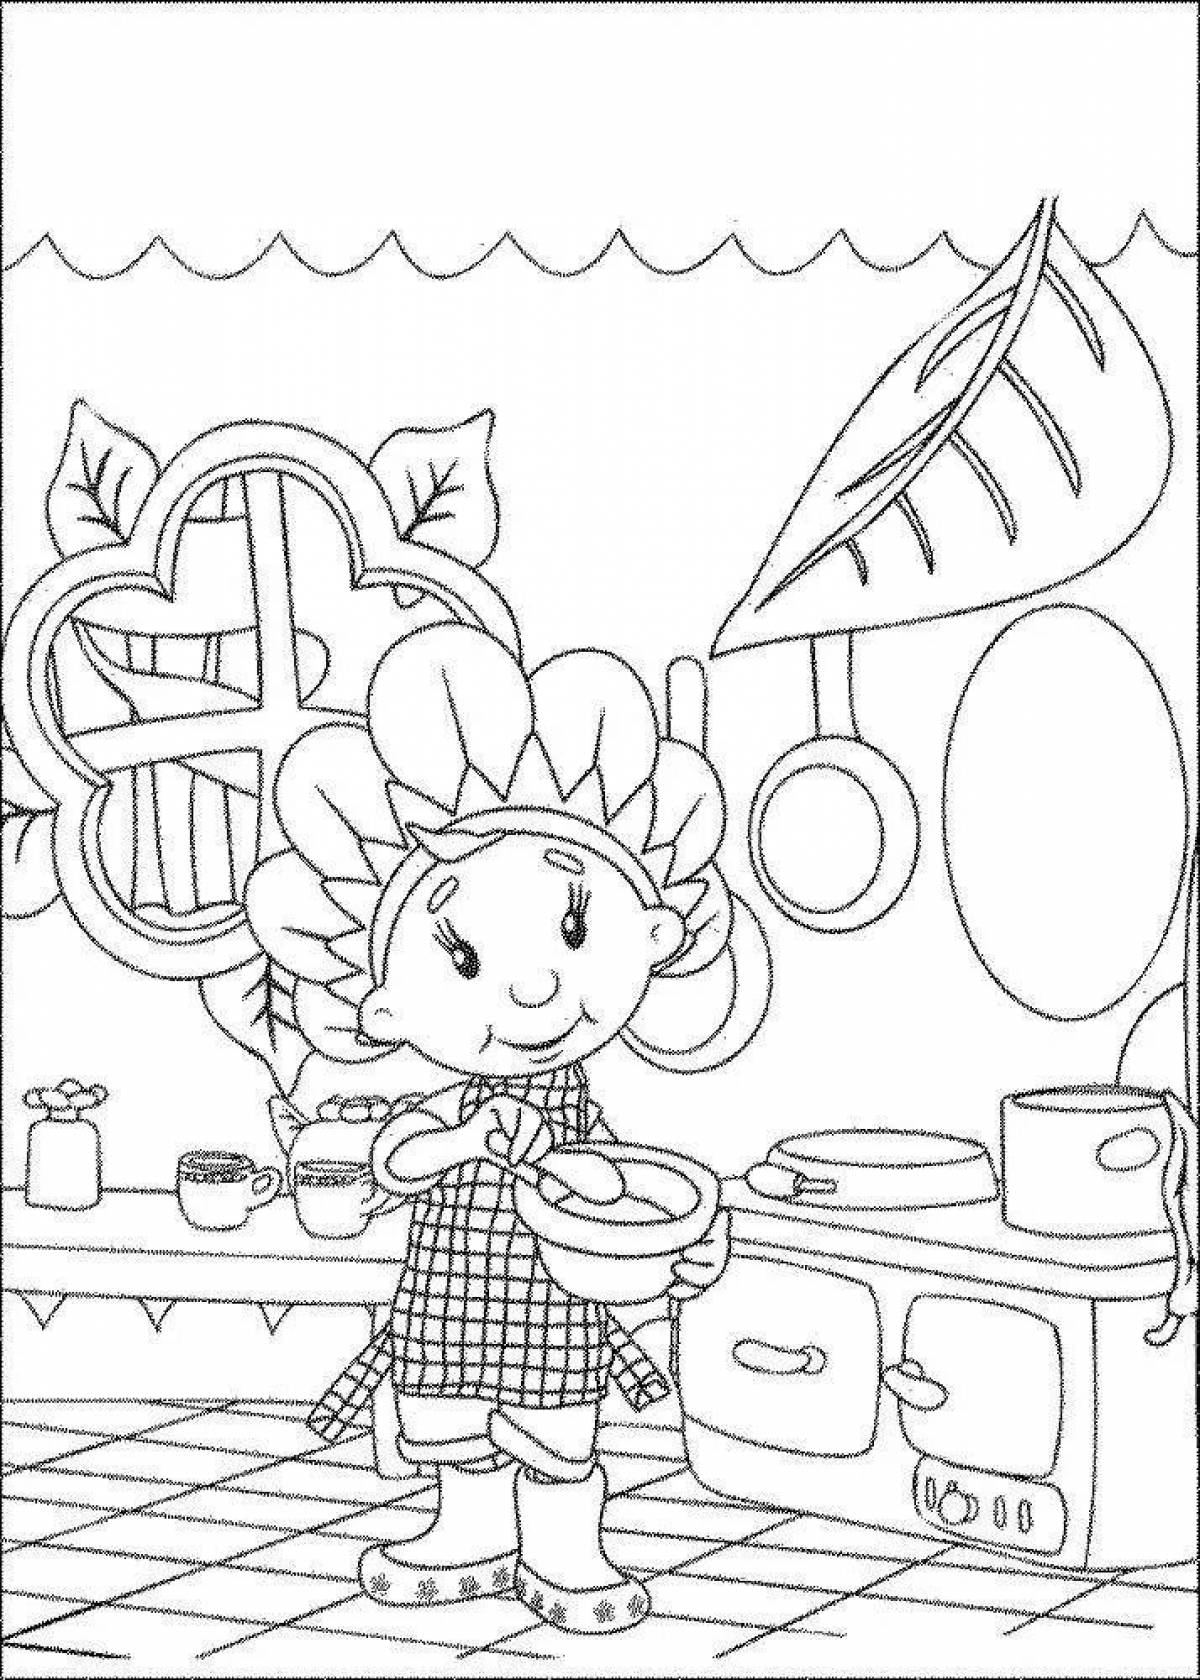 Colorful magic kitchen coloring page